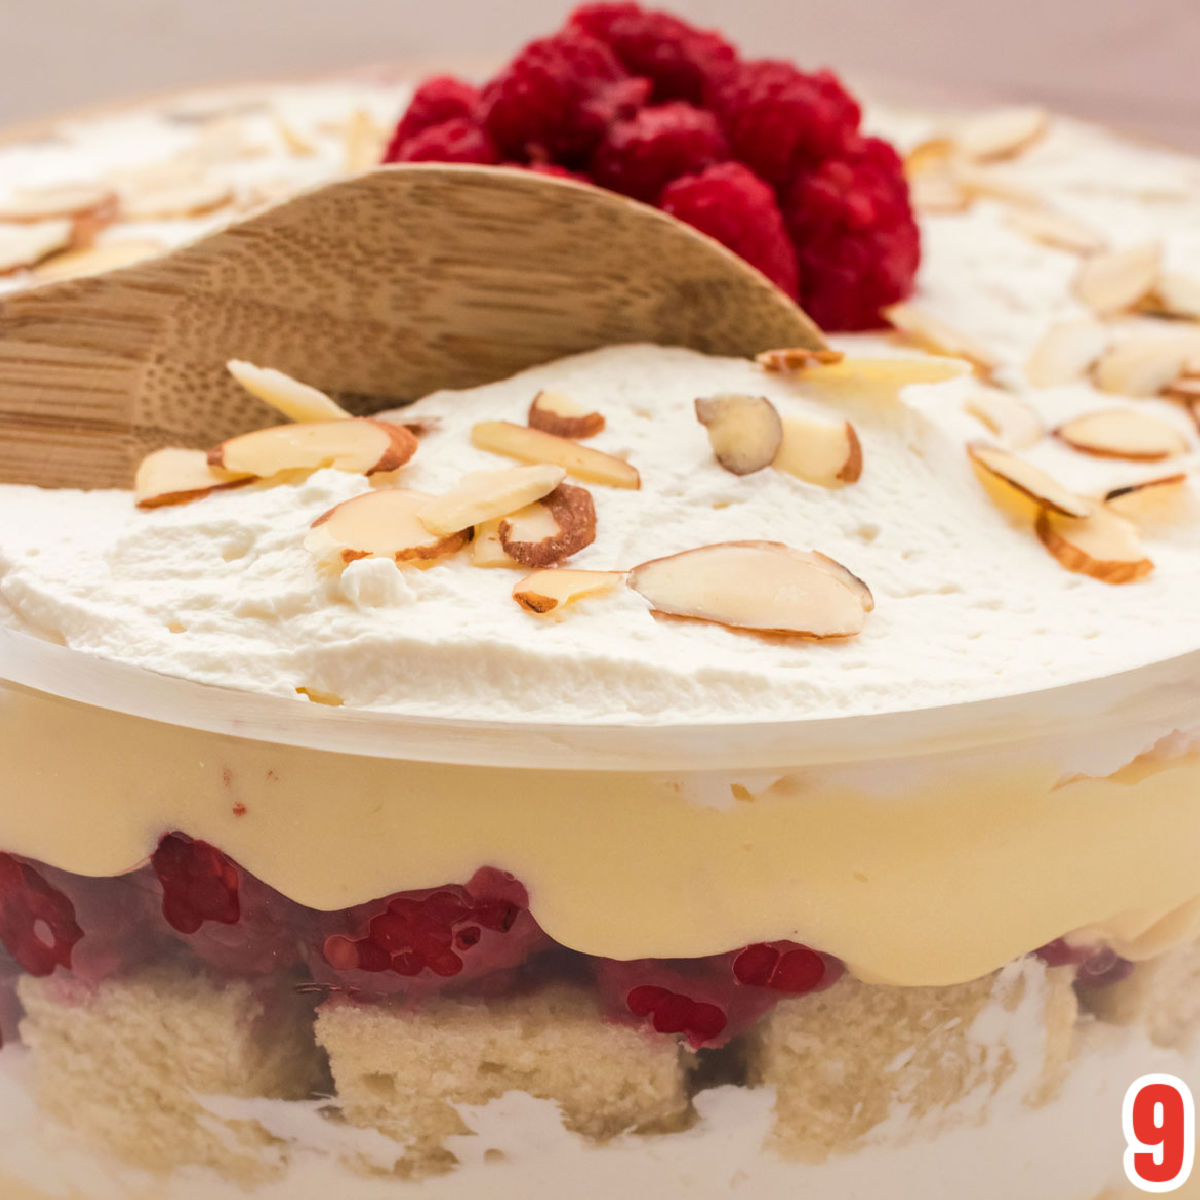 A close up of a large glass bowl filled with English Trifle showing the layers of pound cake, raspberries, custard and whipped cream.